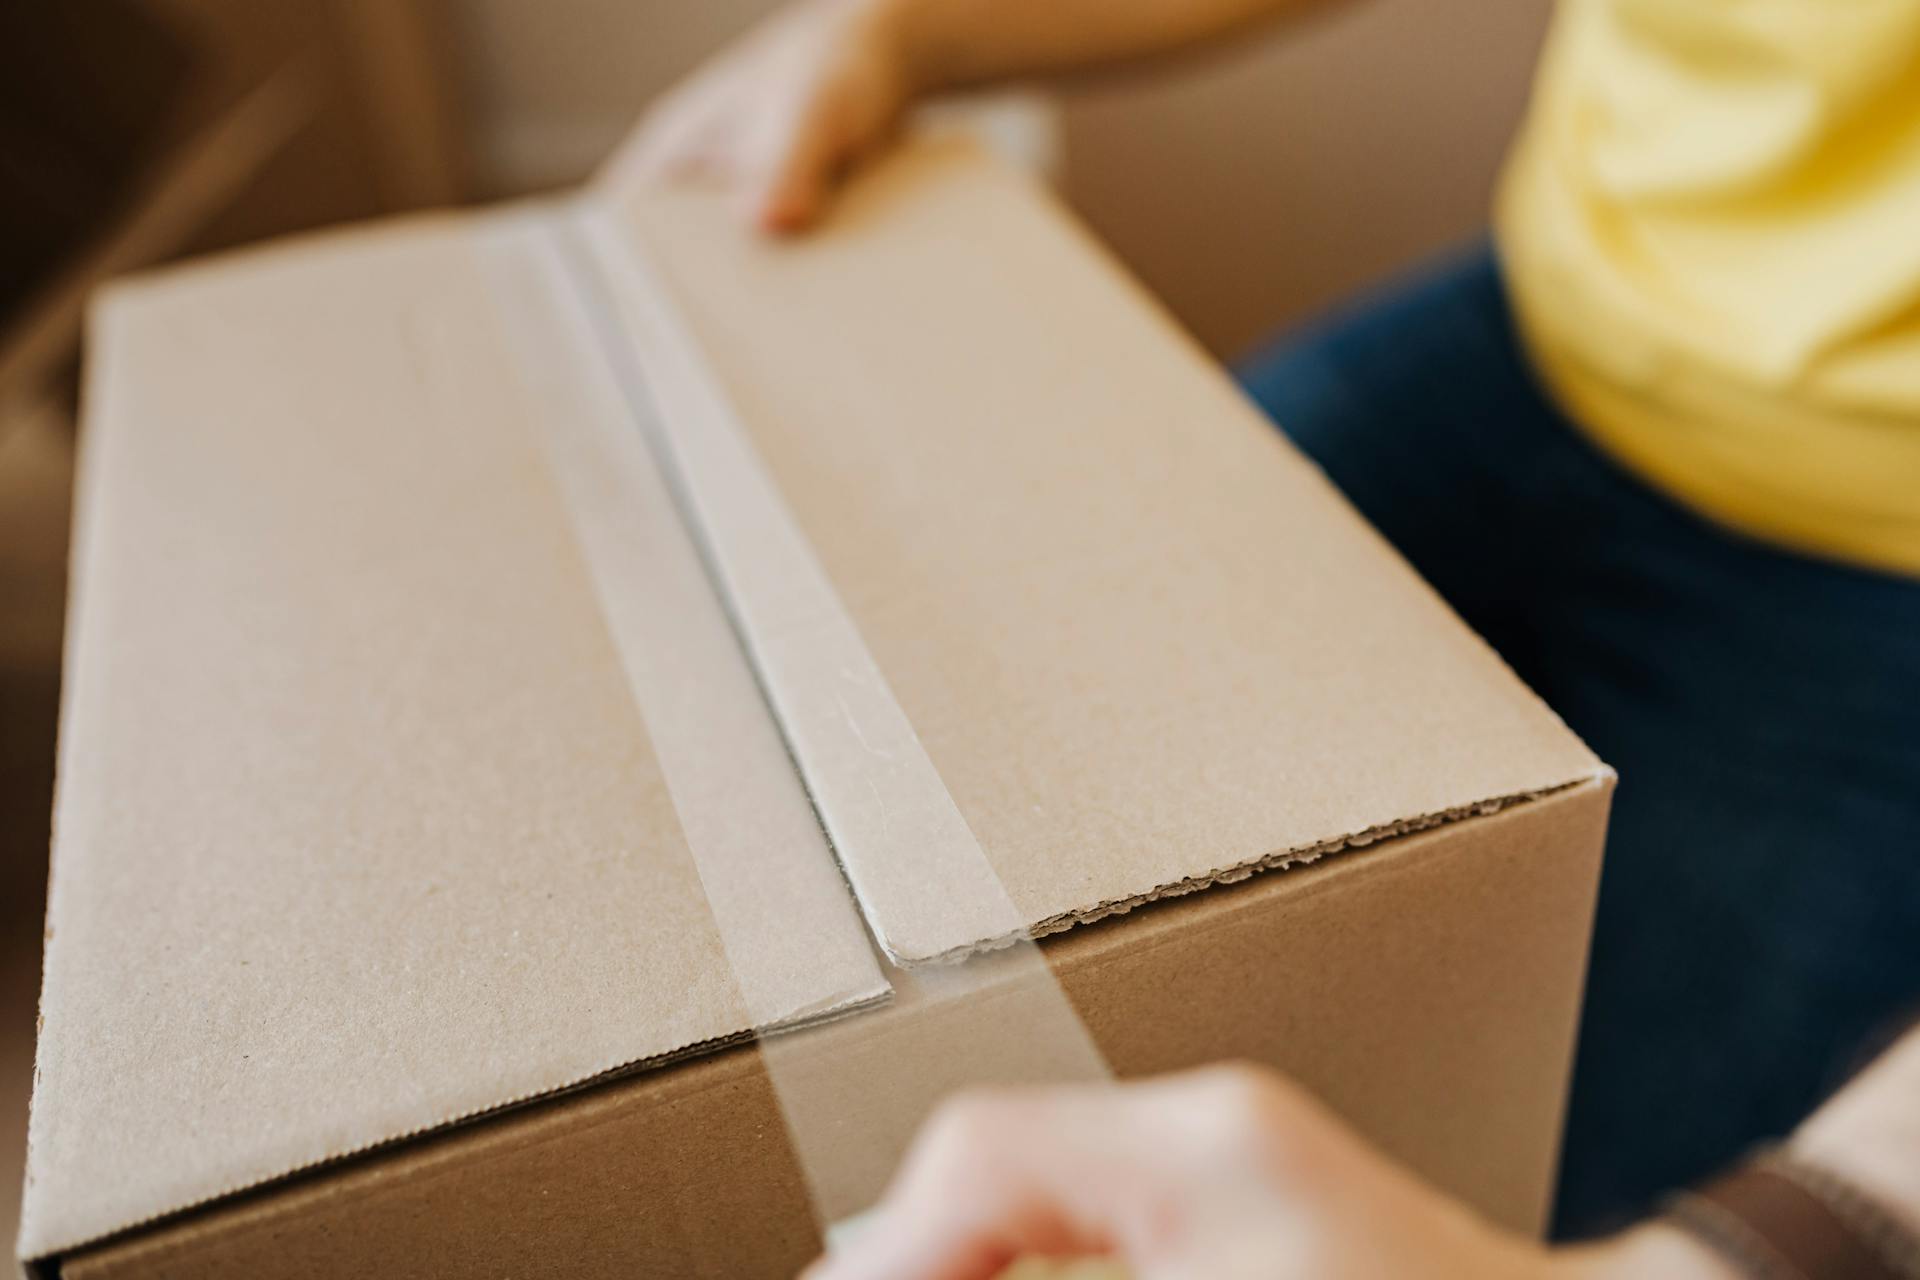 A person with a brown cardboard box | Source: Pexels